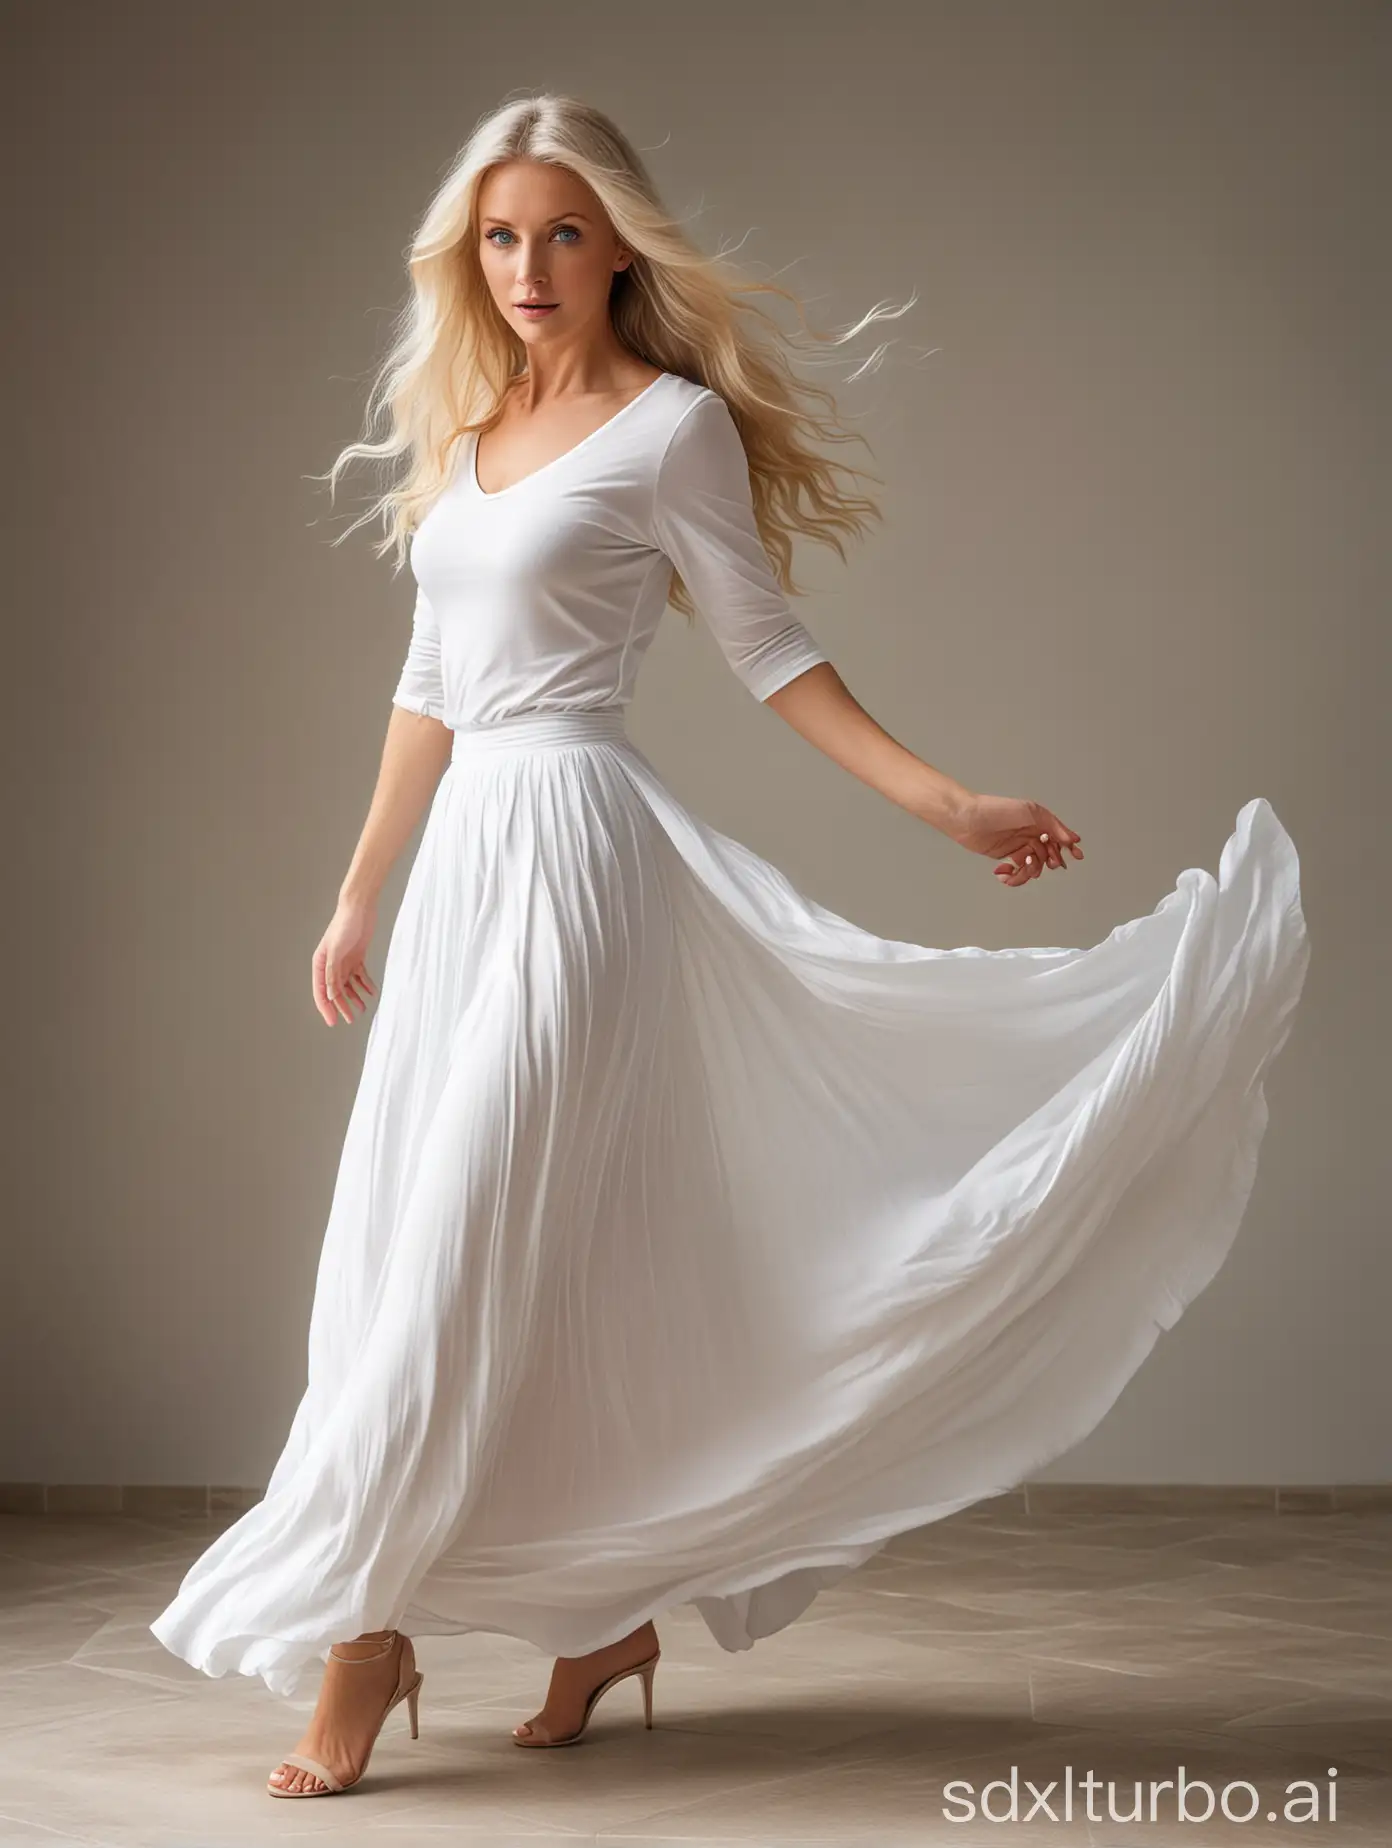 Graceful-Blonde-Woman-with-Flowing-Skirt-in-Enchanted-Setting